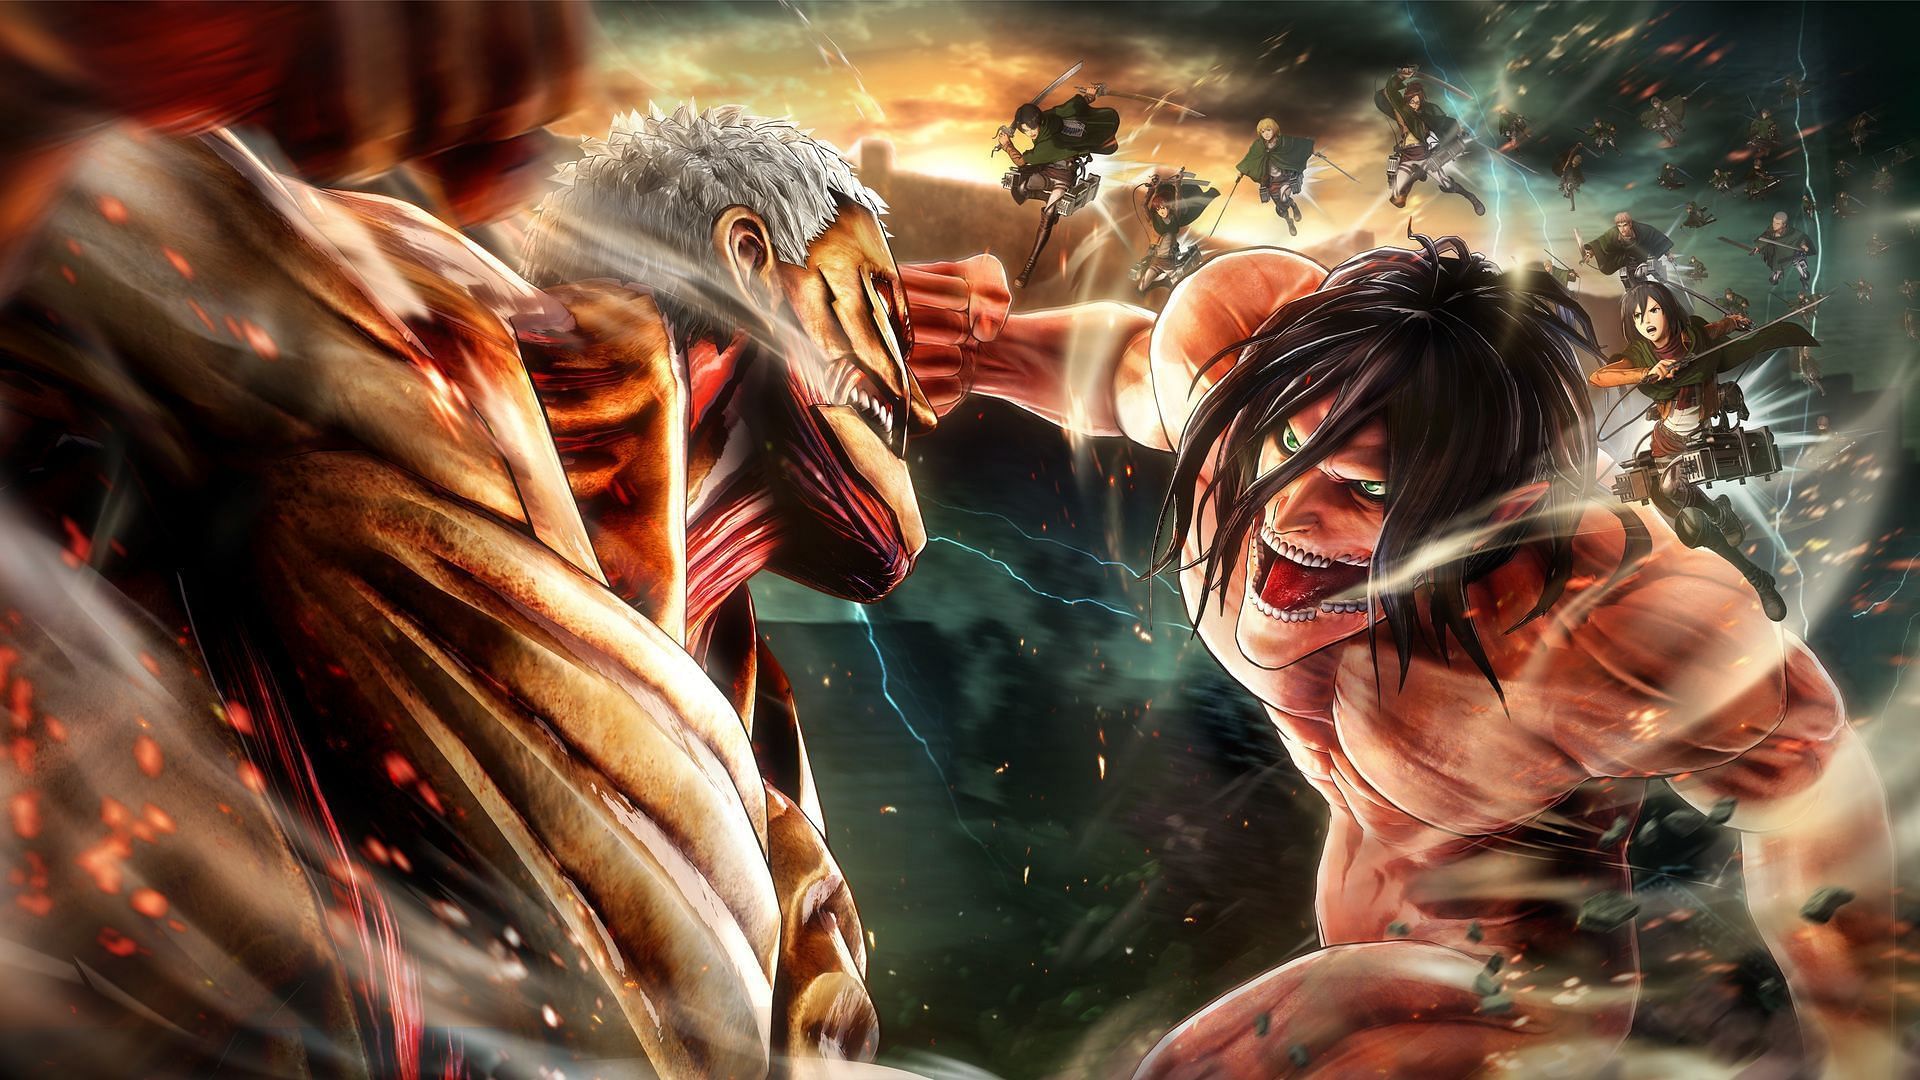 The titanic forms of some of the characters in Attack on Titan (Image via Studio Pierrot)